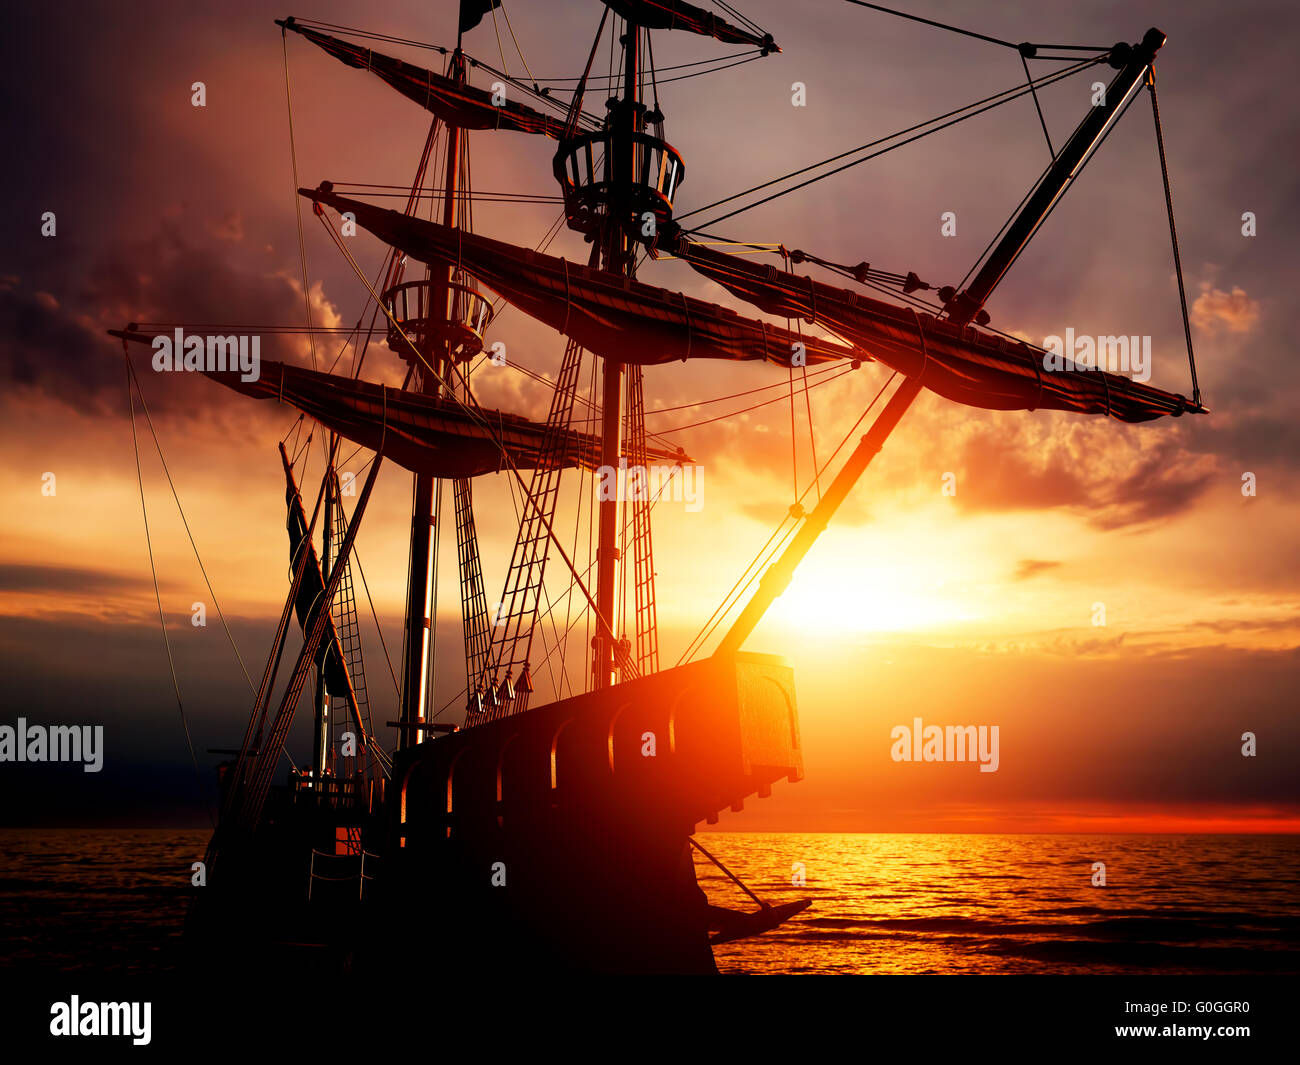 Old ancient pirate ship on peaceful ocean at sunset. Stock Photo